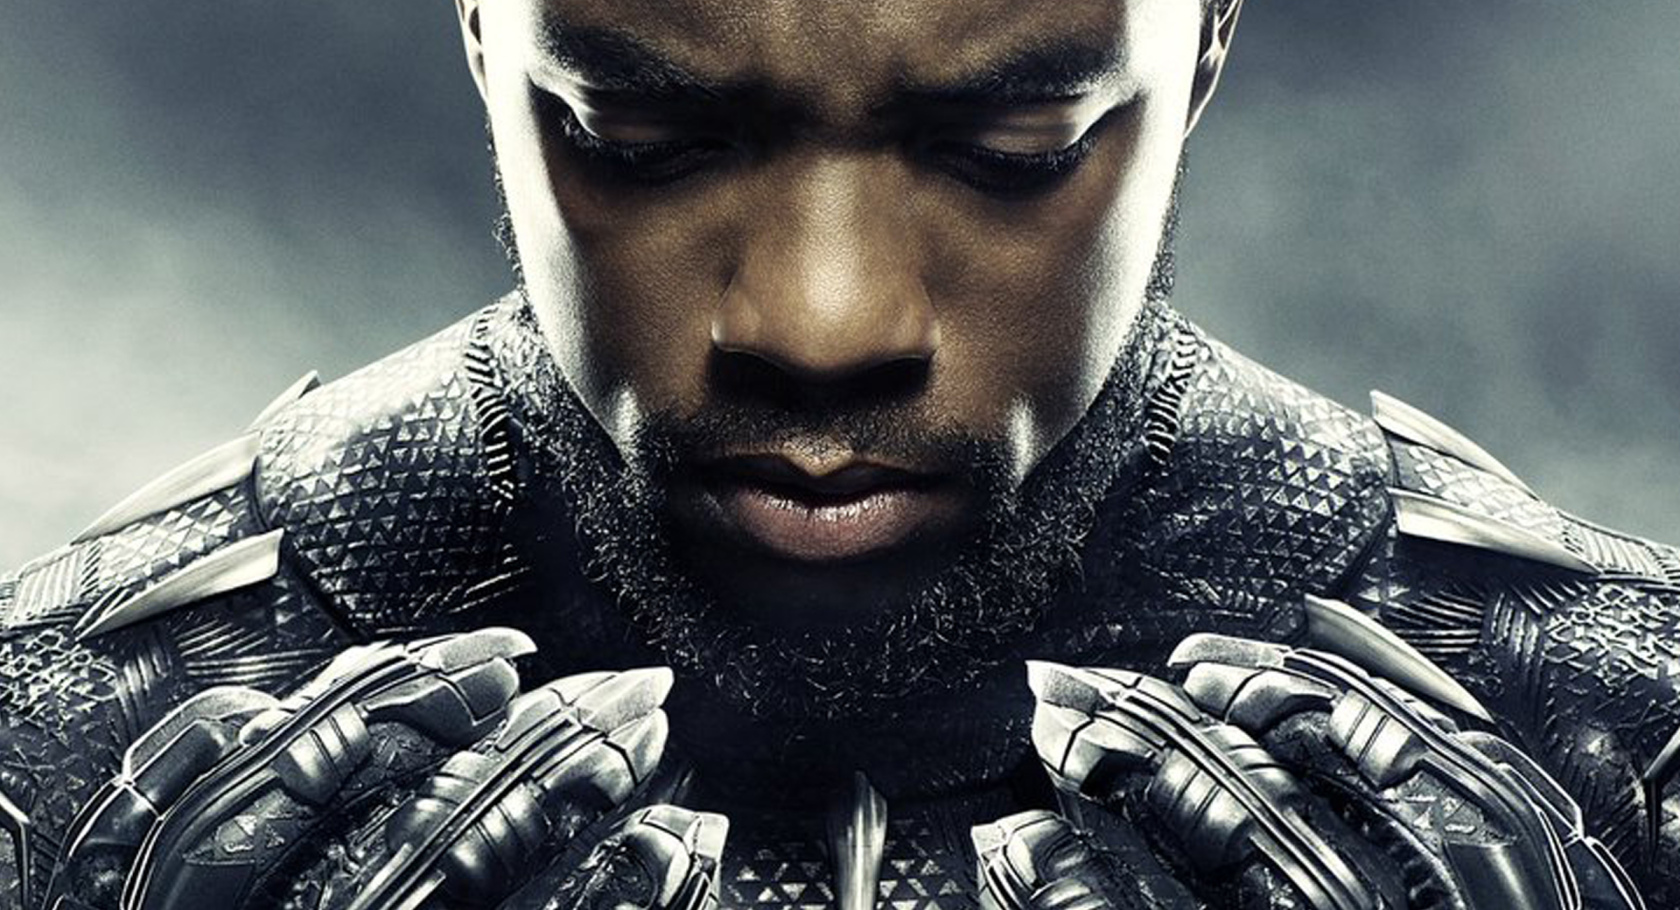 Which Original Avenger Are You? Black Panther